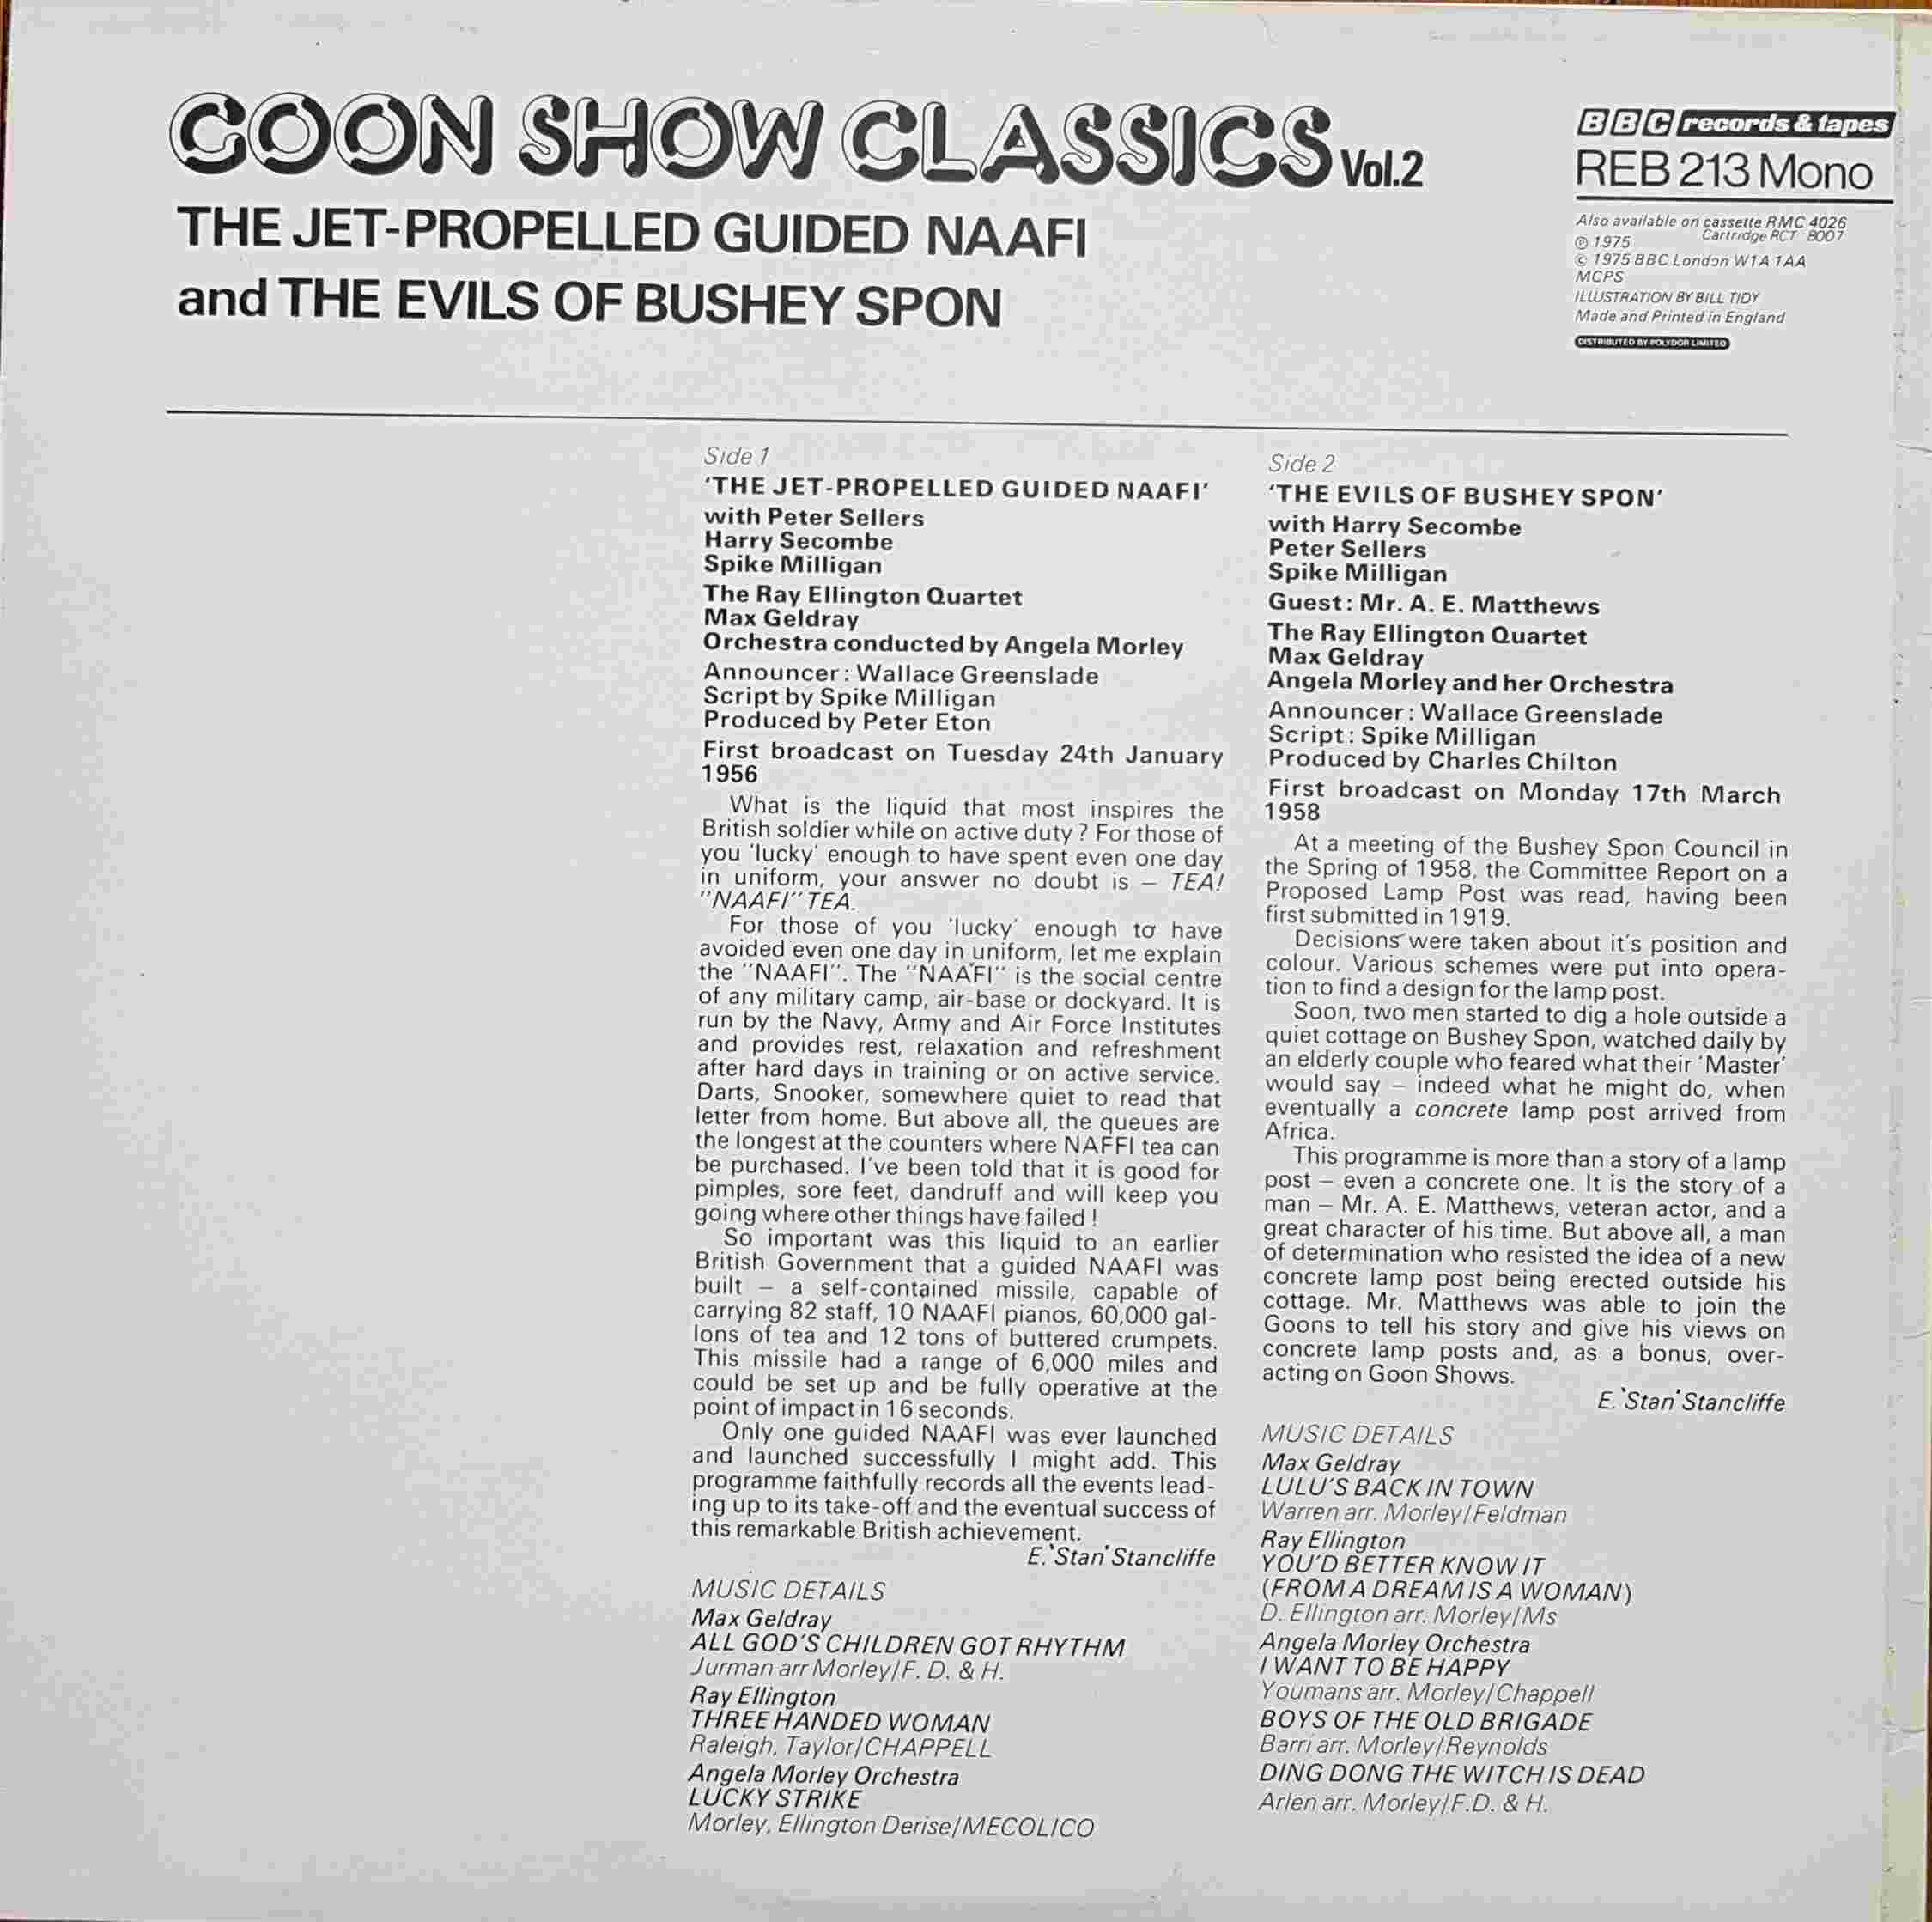 Picture of REB 213 Goon show classics - Volume 2 by artist Spike Milligan from the BBC records and Tapes library